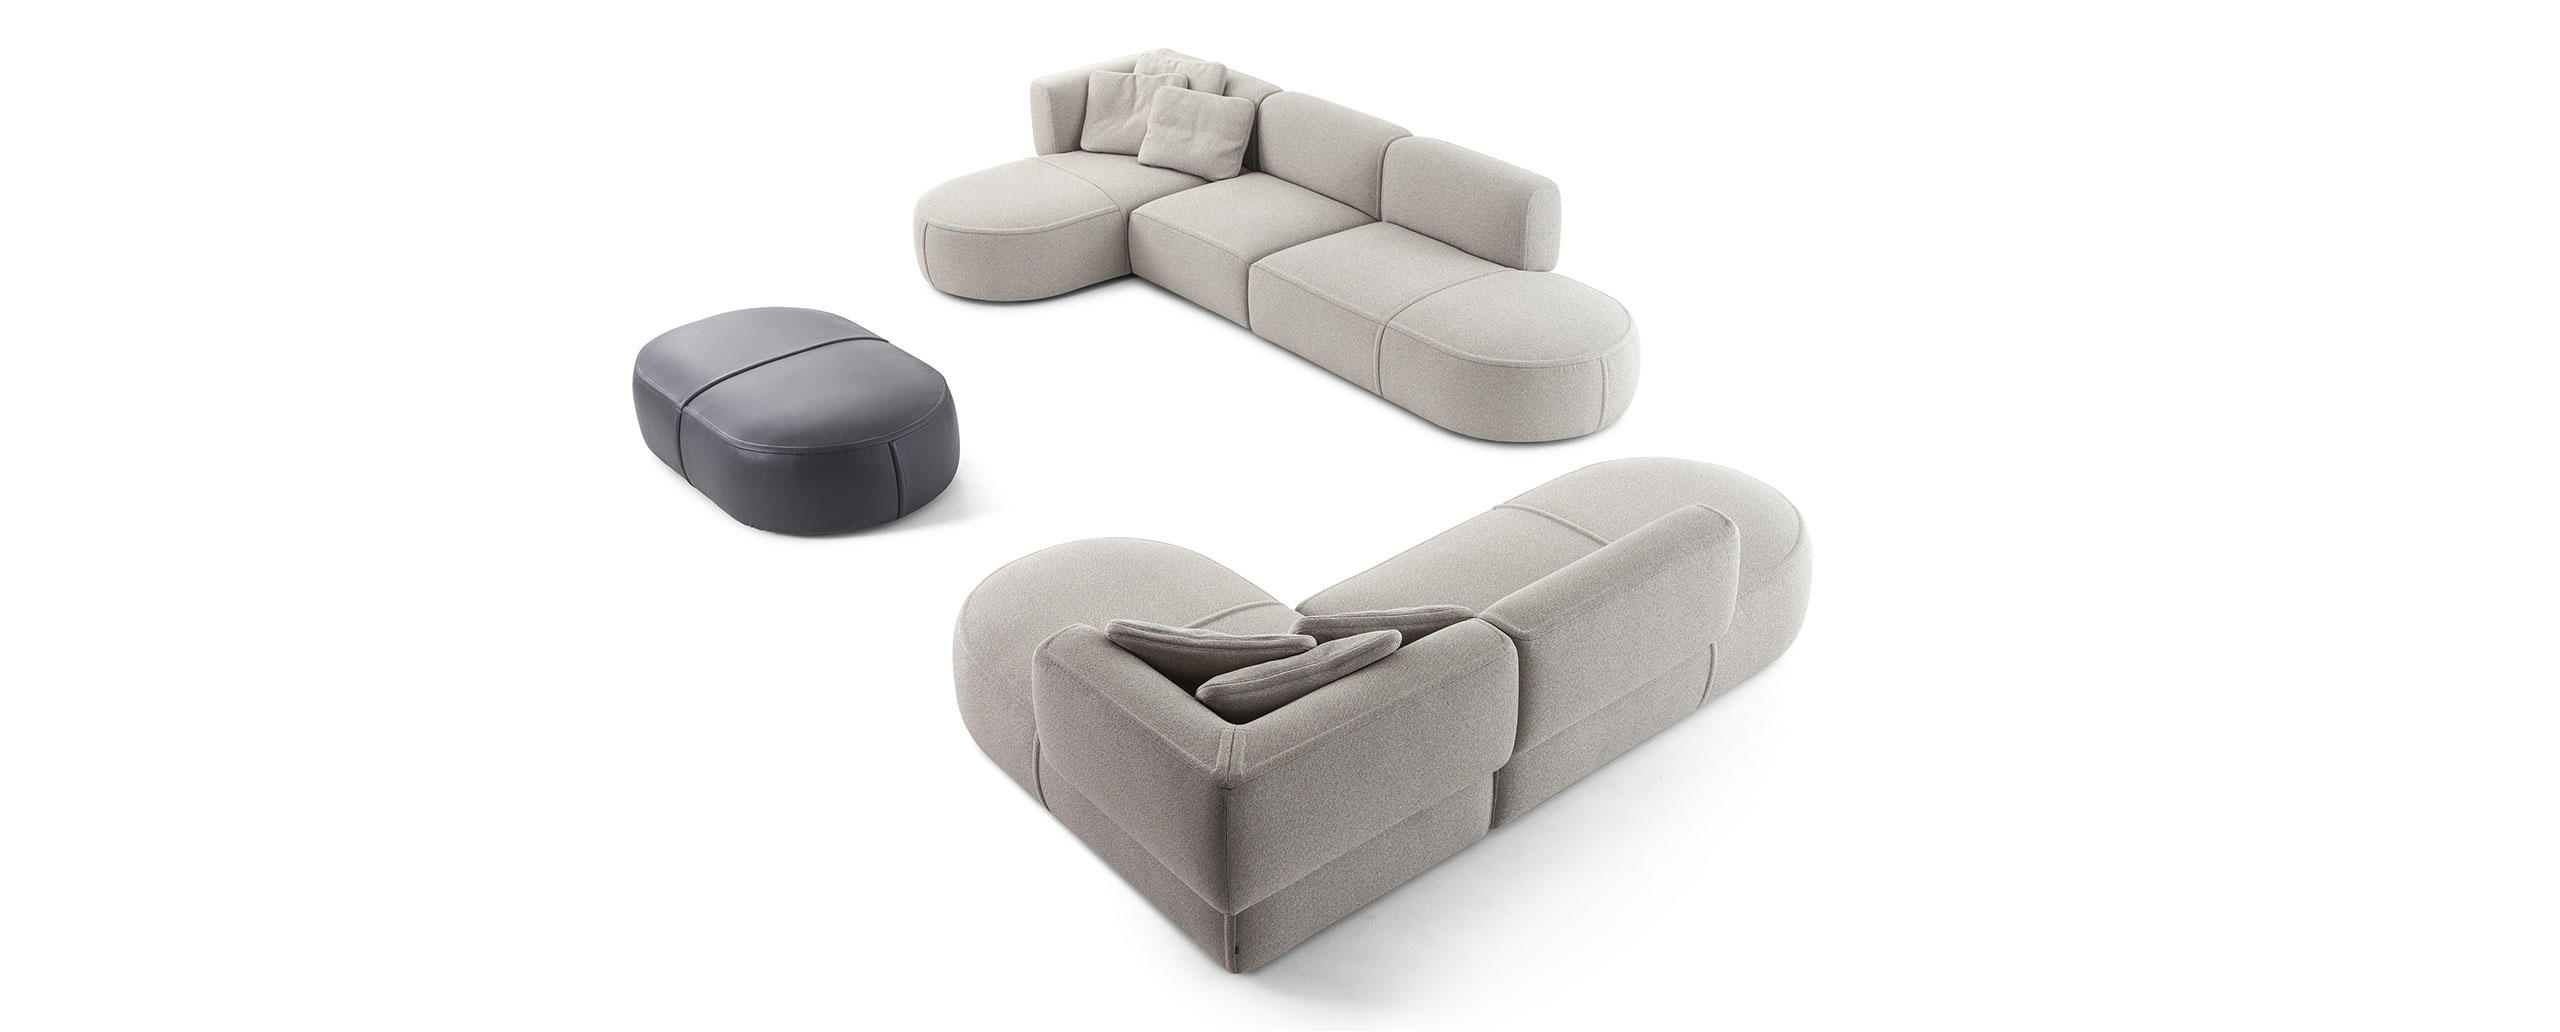 two modern upholstered ground sofa with pill-shaped ottoman against white background